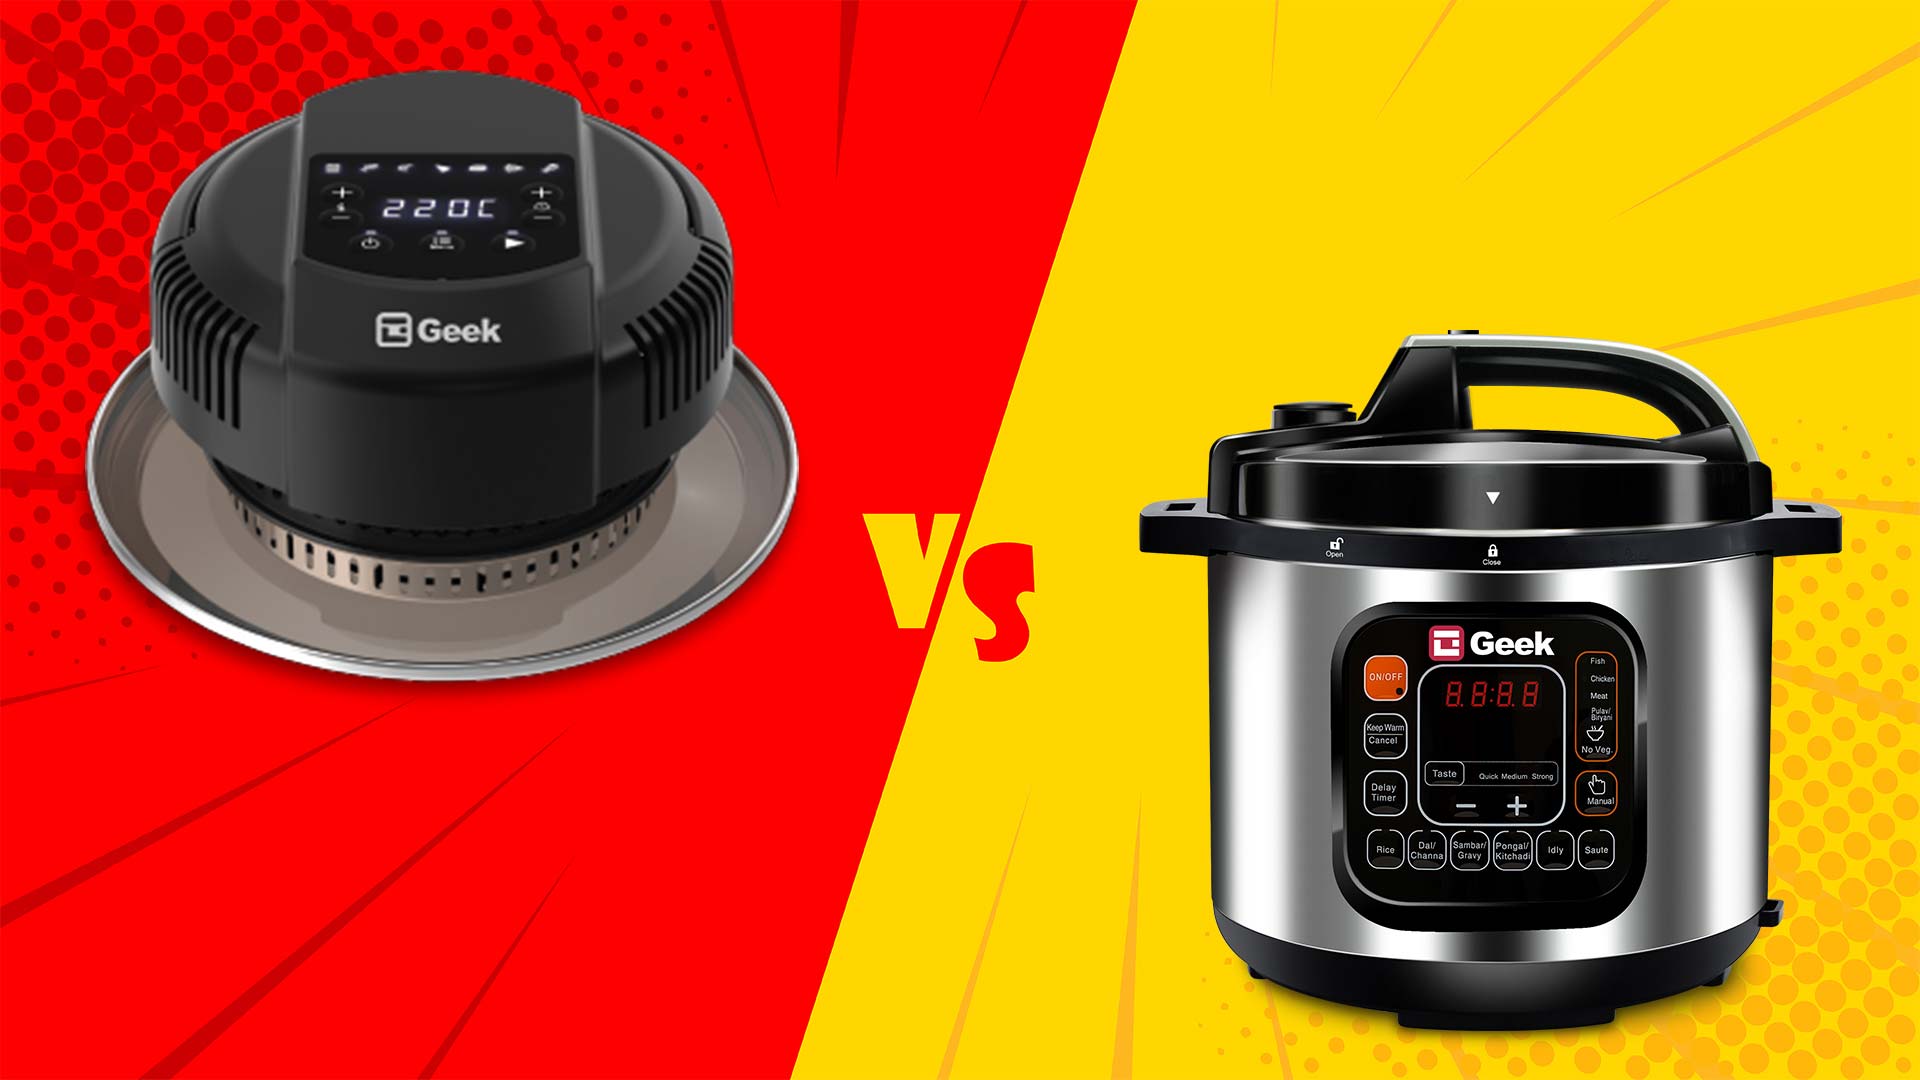 Air Fryer Vs Pressure Cooker: Which One Is Better for YOU?